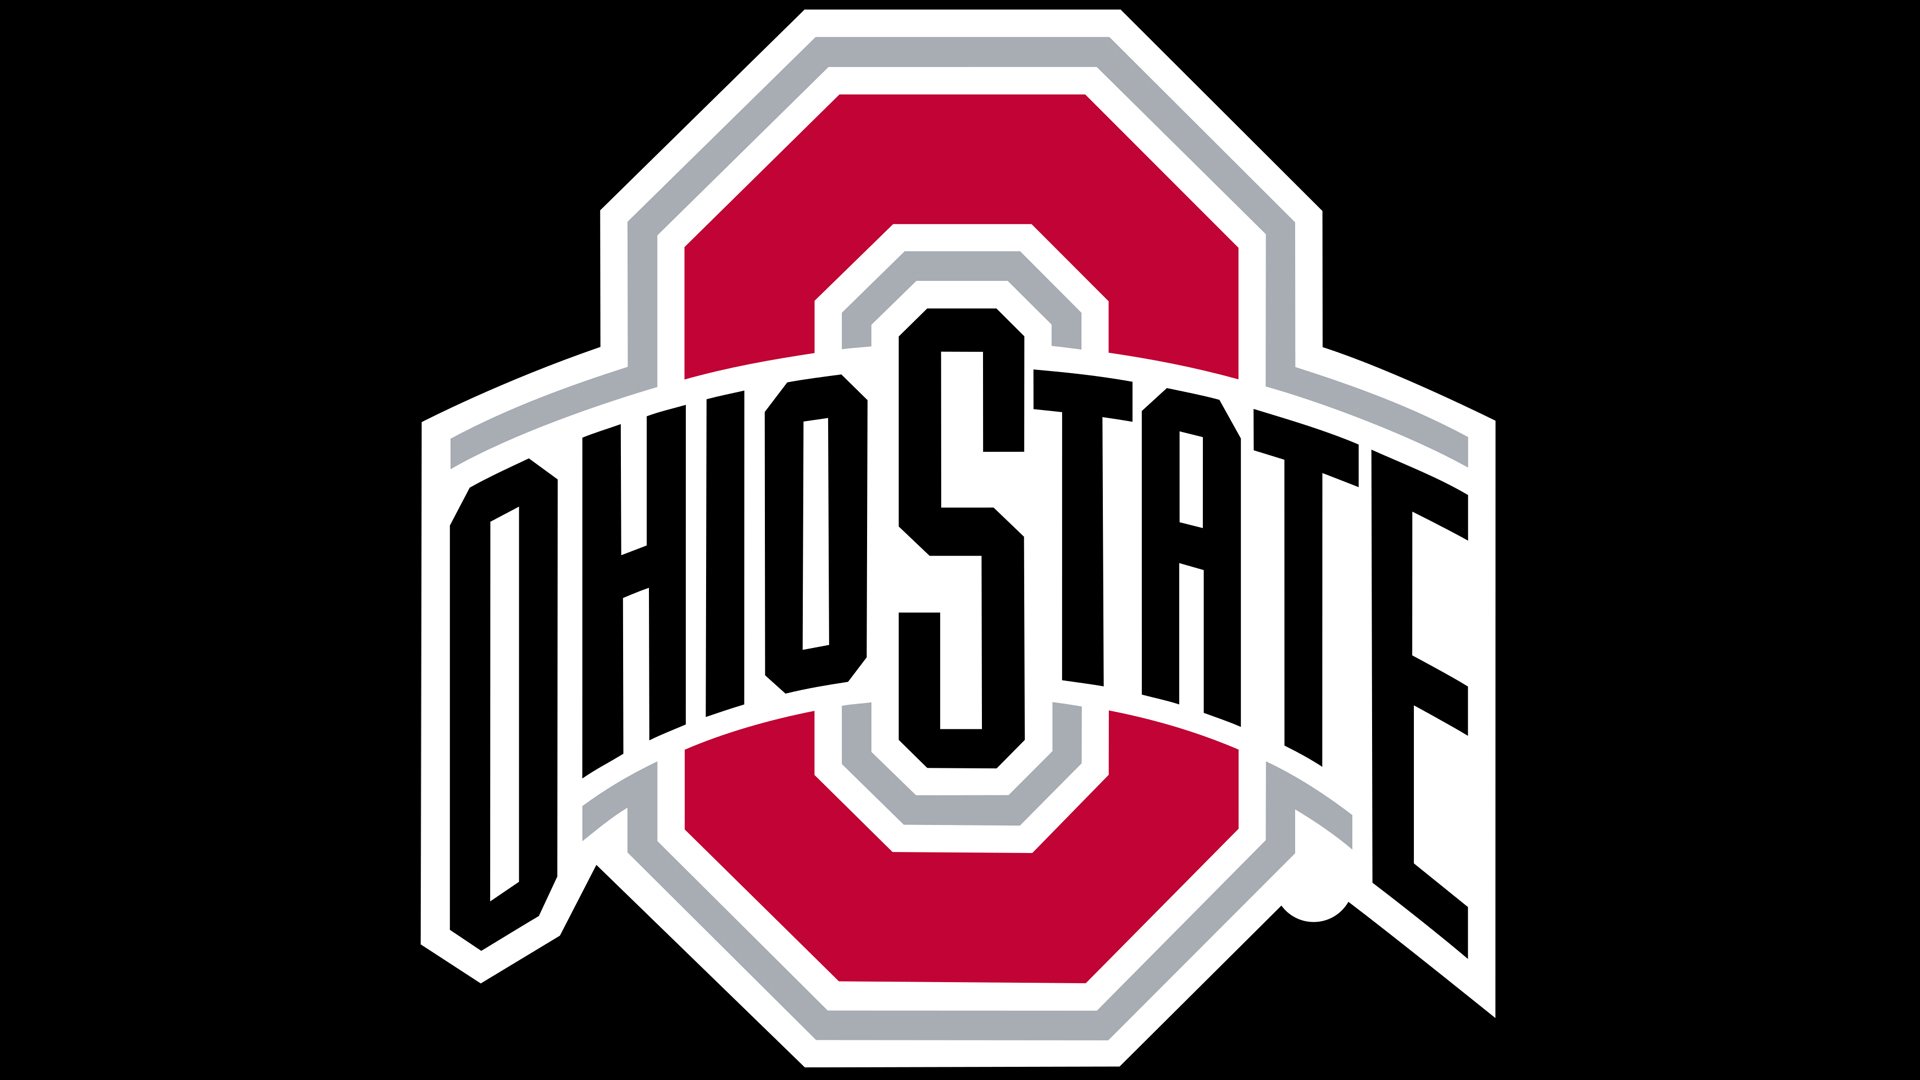 The Ohio State University, Research, Education, Buckeyes